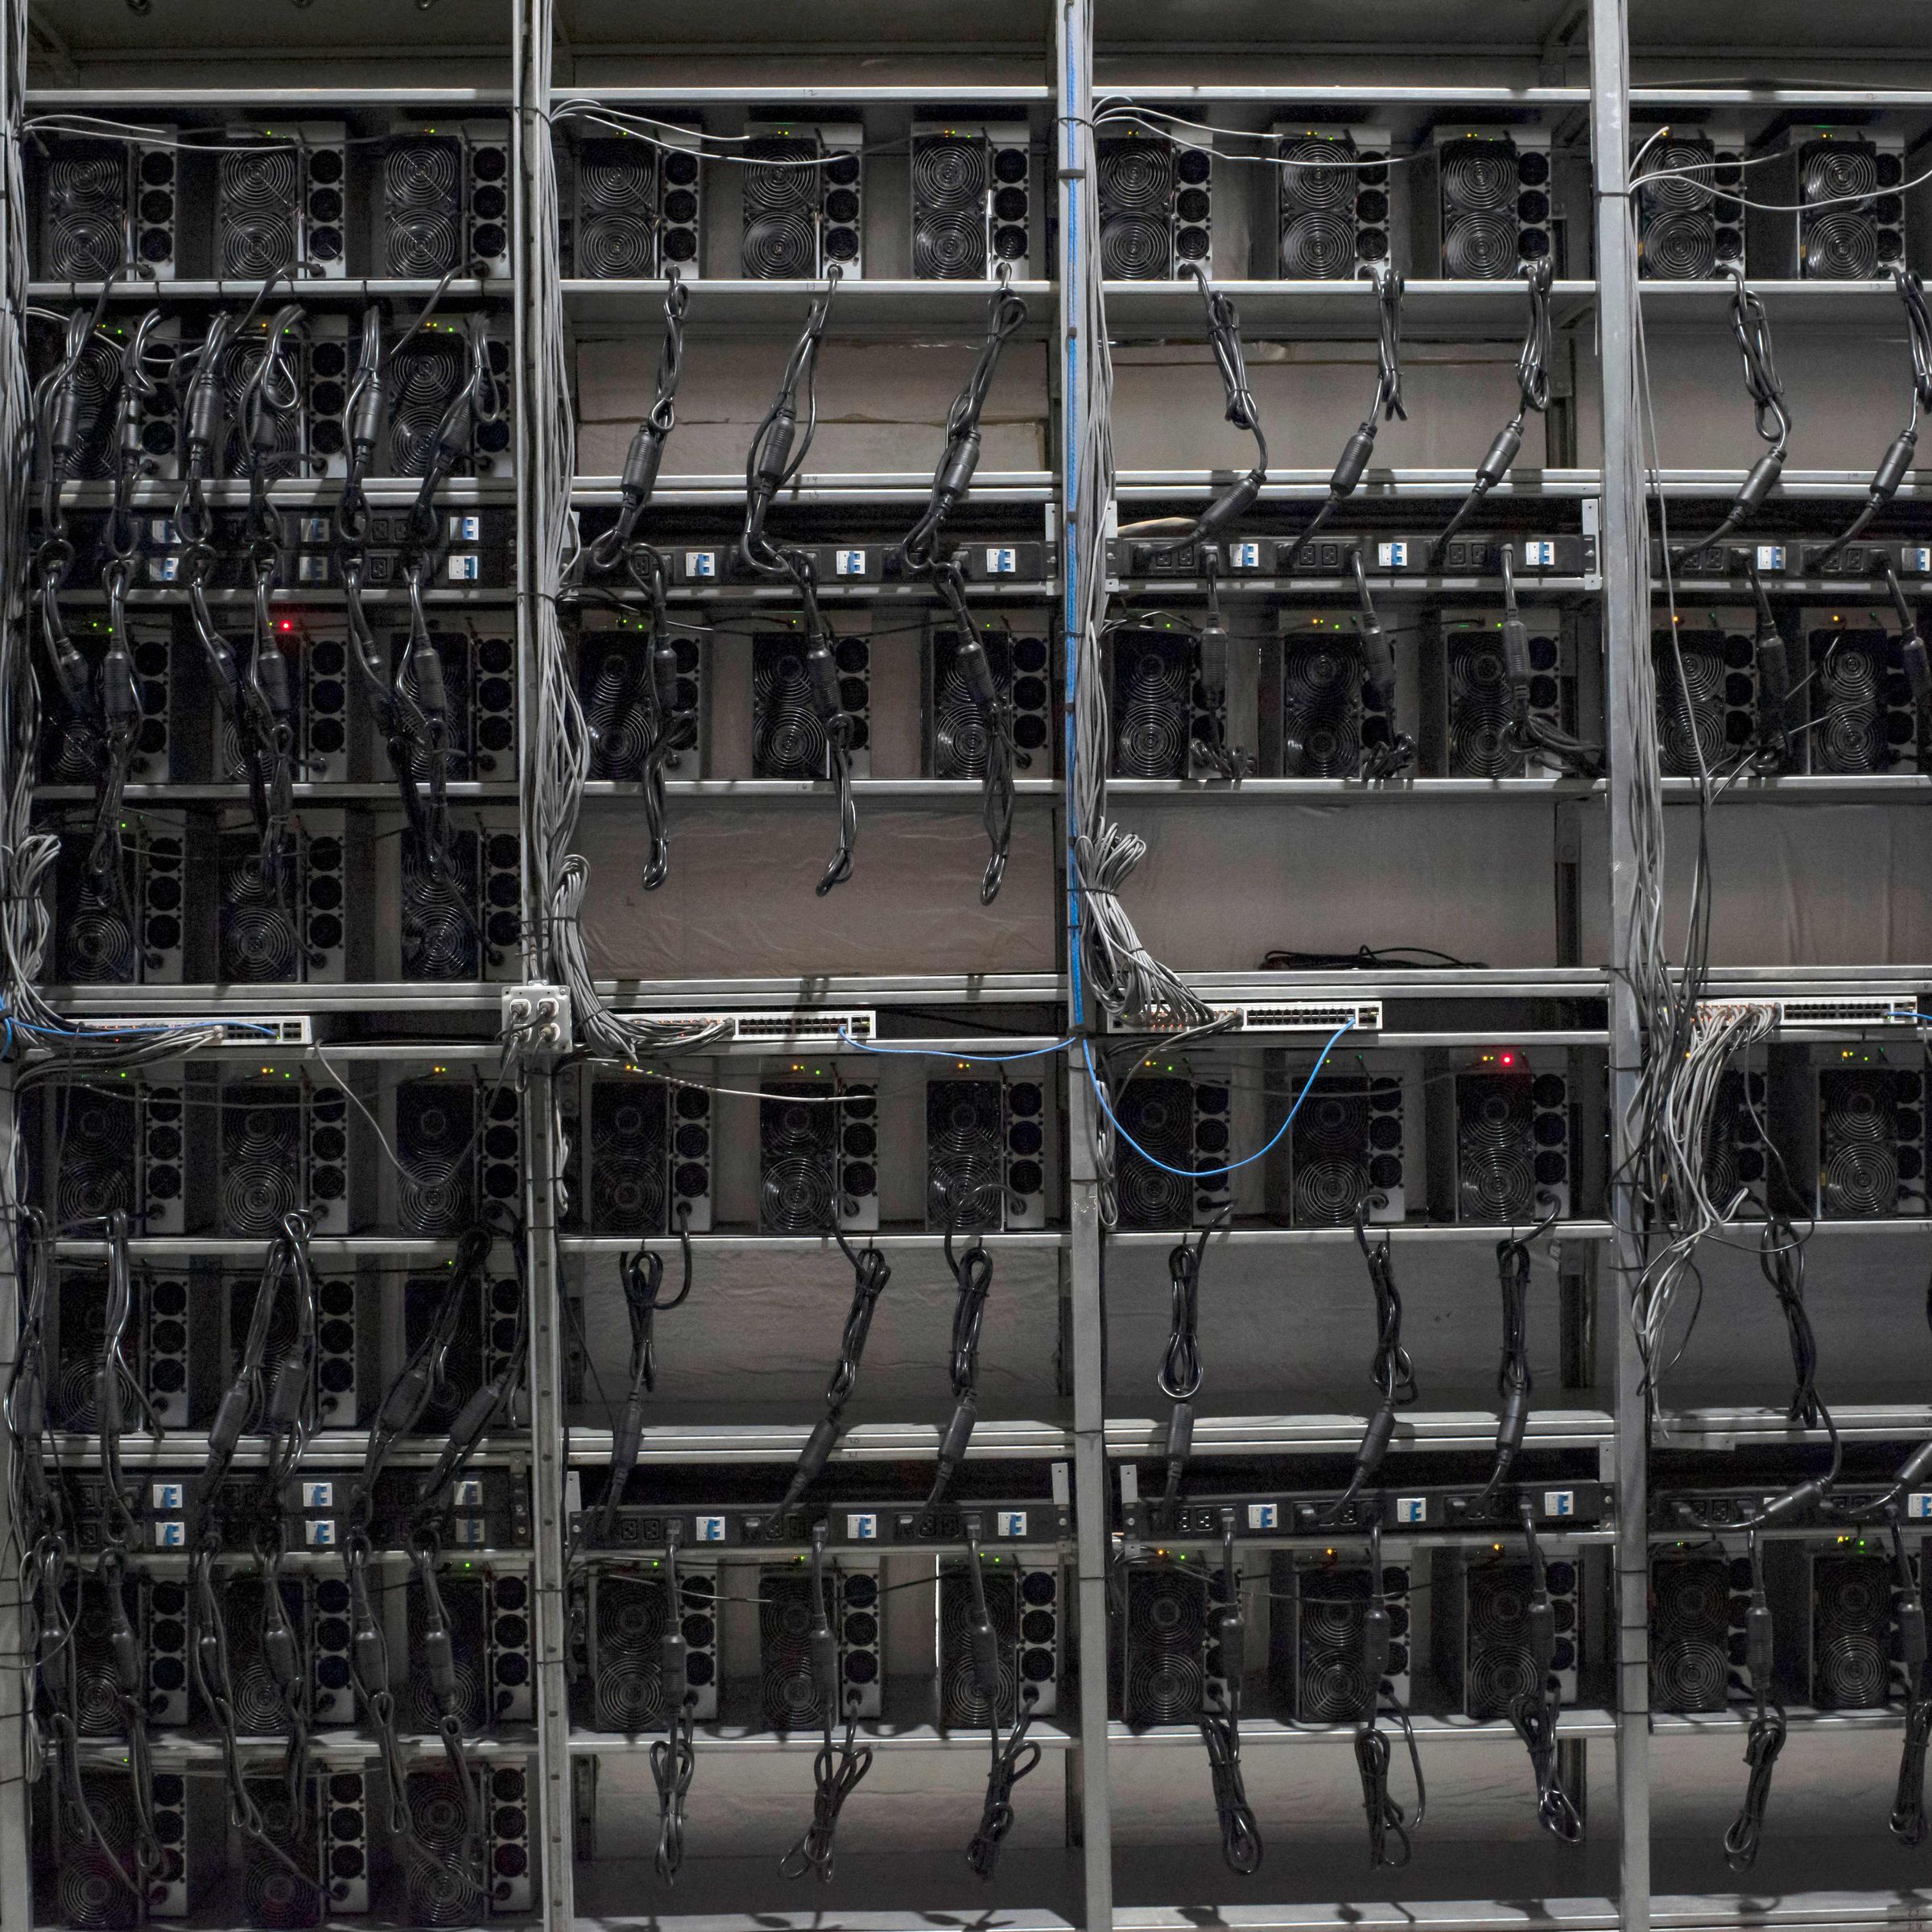 Rows of Bitcoin mining machines on shelves with wires hanging from them